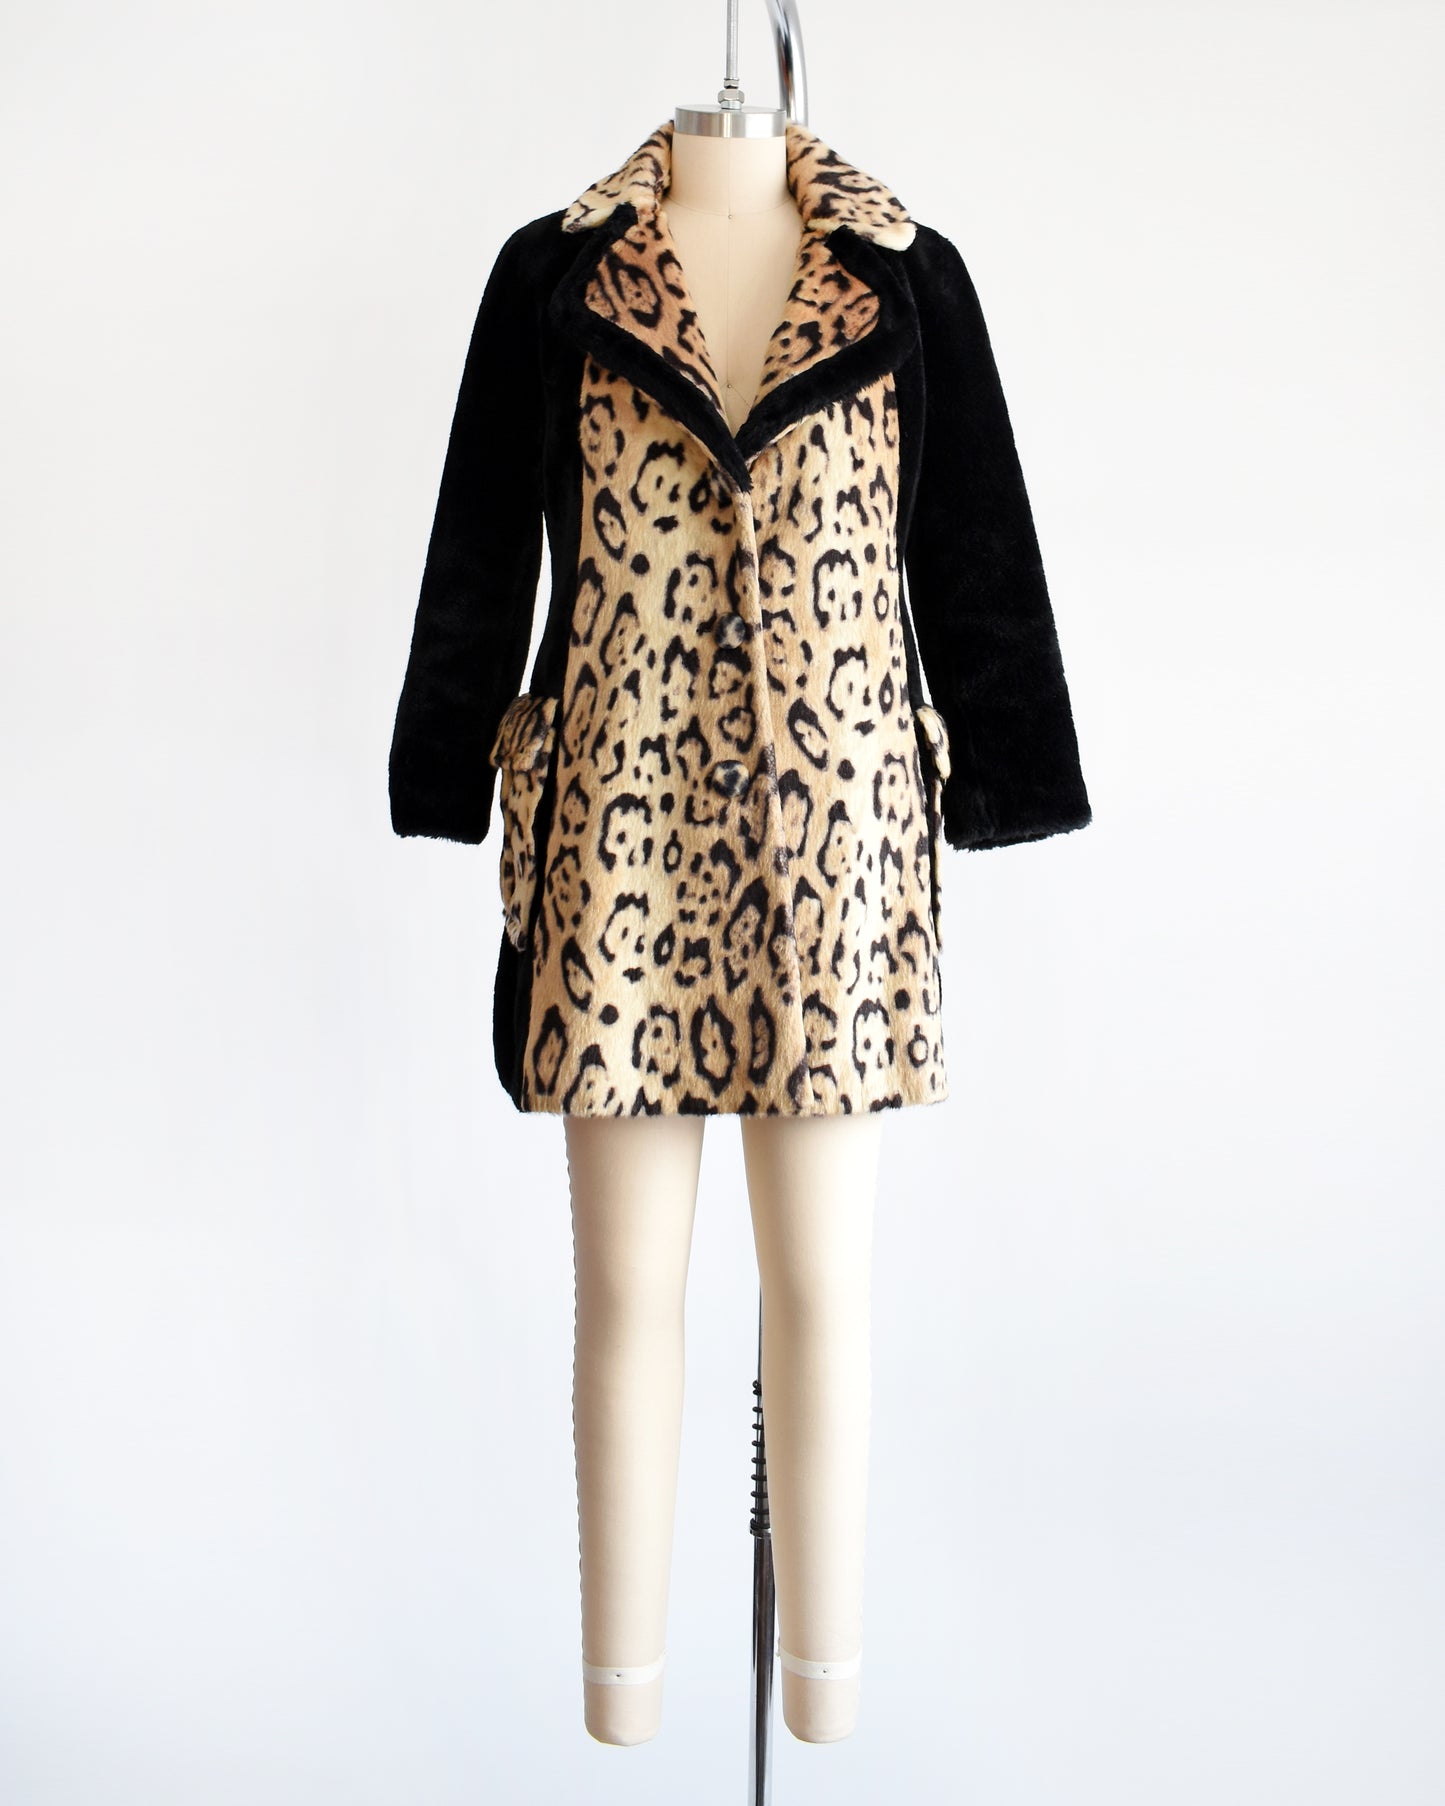 A vintage late 1960s early 1970s leopard faux fur coat that has large leopard print on the collar, down the front, and on the large side pockets. Black plush long sleeves, sides, and back. Matching black trim on the collar